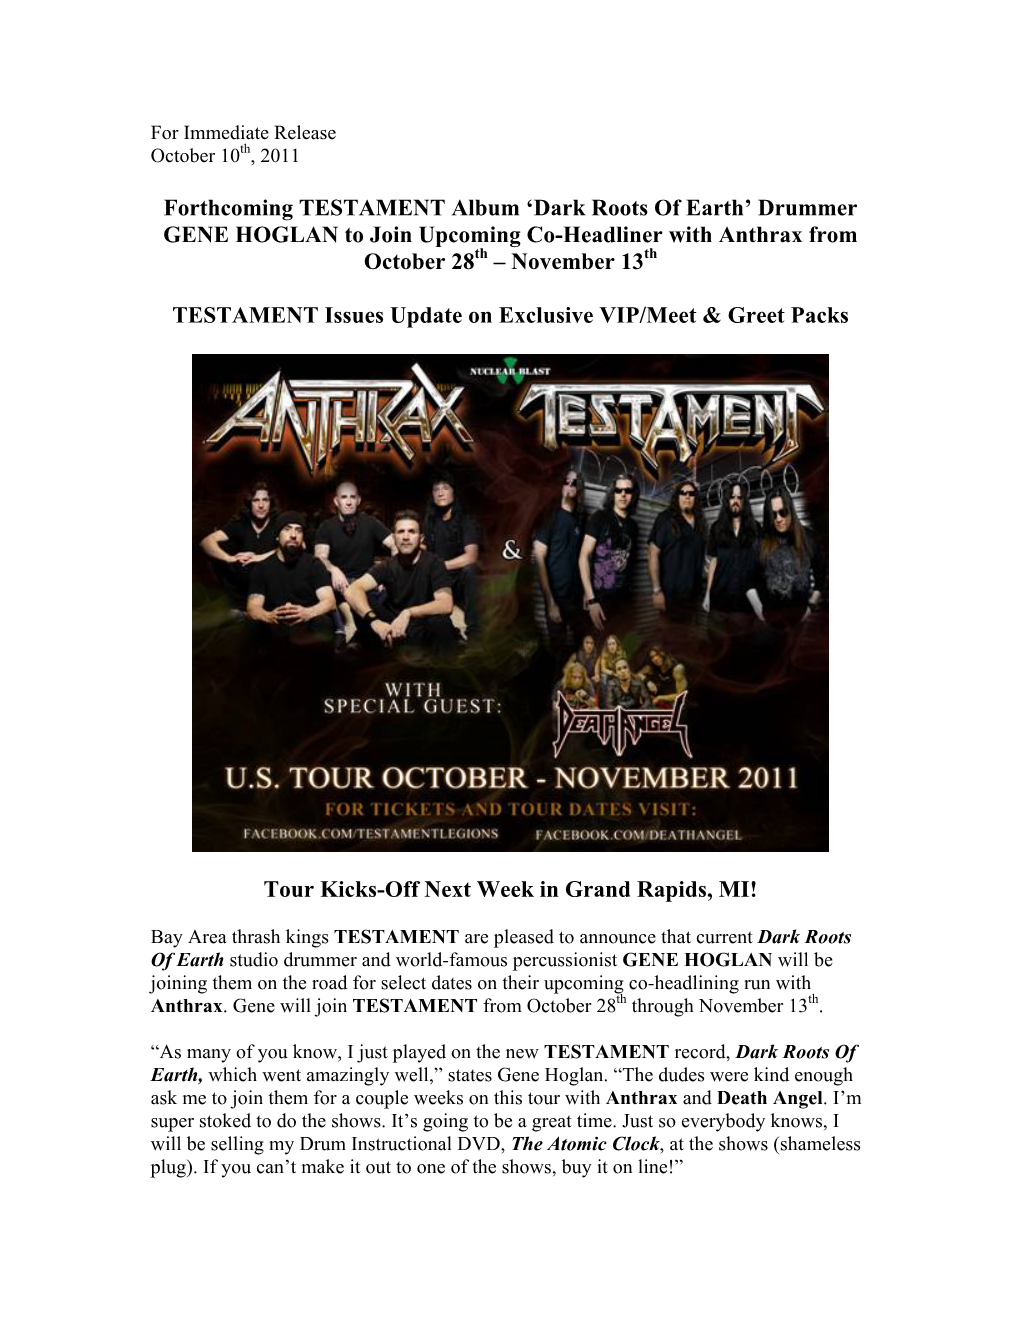 Forthcoming TESTAMENT Album 'Dark Roots of Earth'